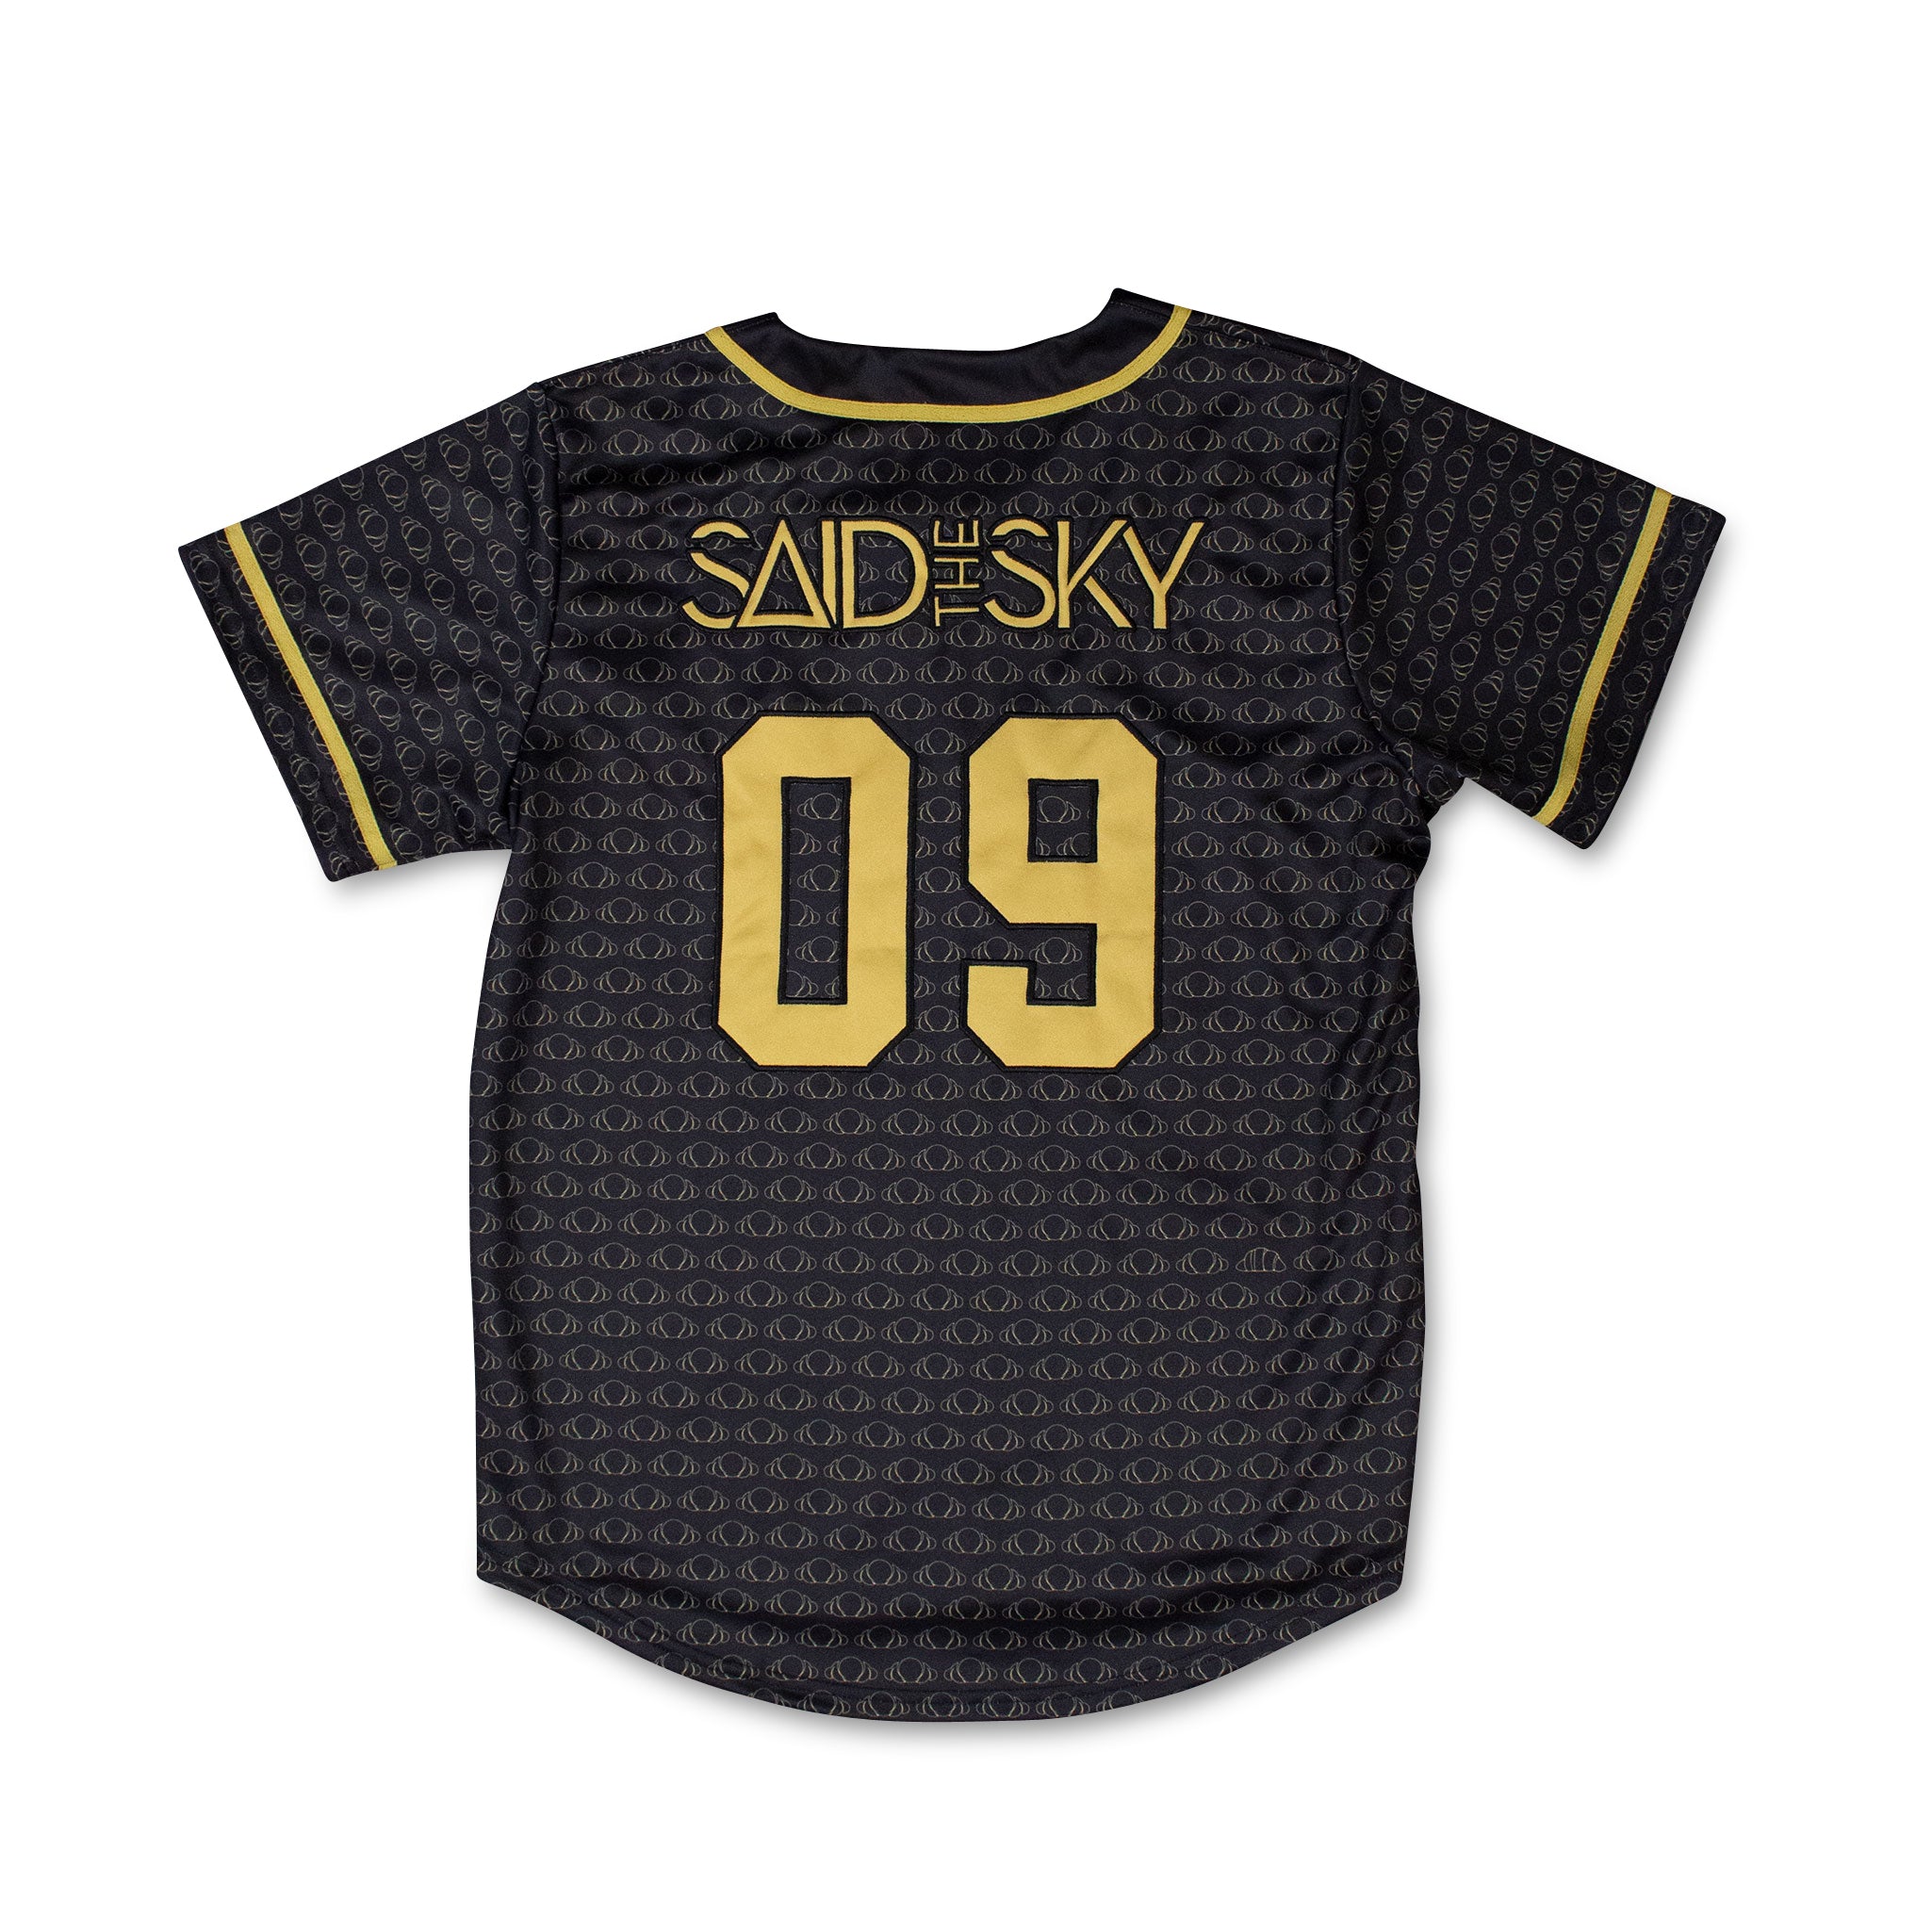 Baseball Jersey Black Said The Sky Official Merch Store